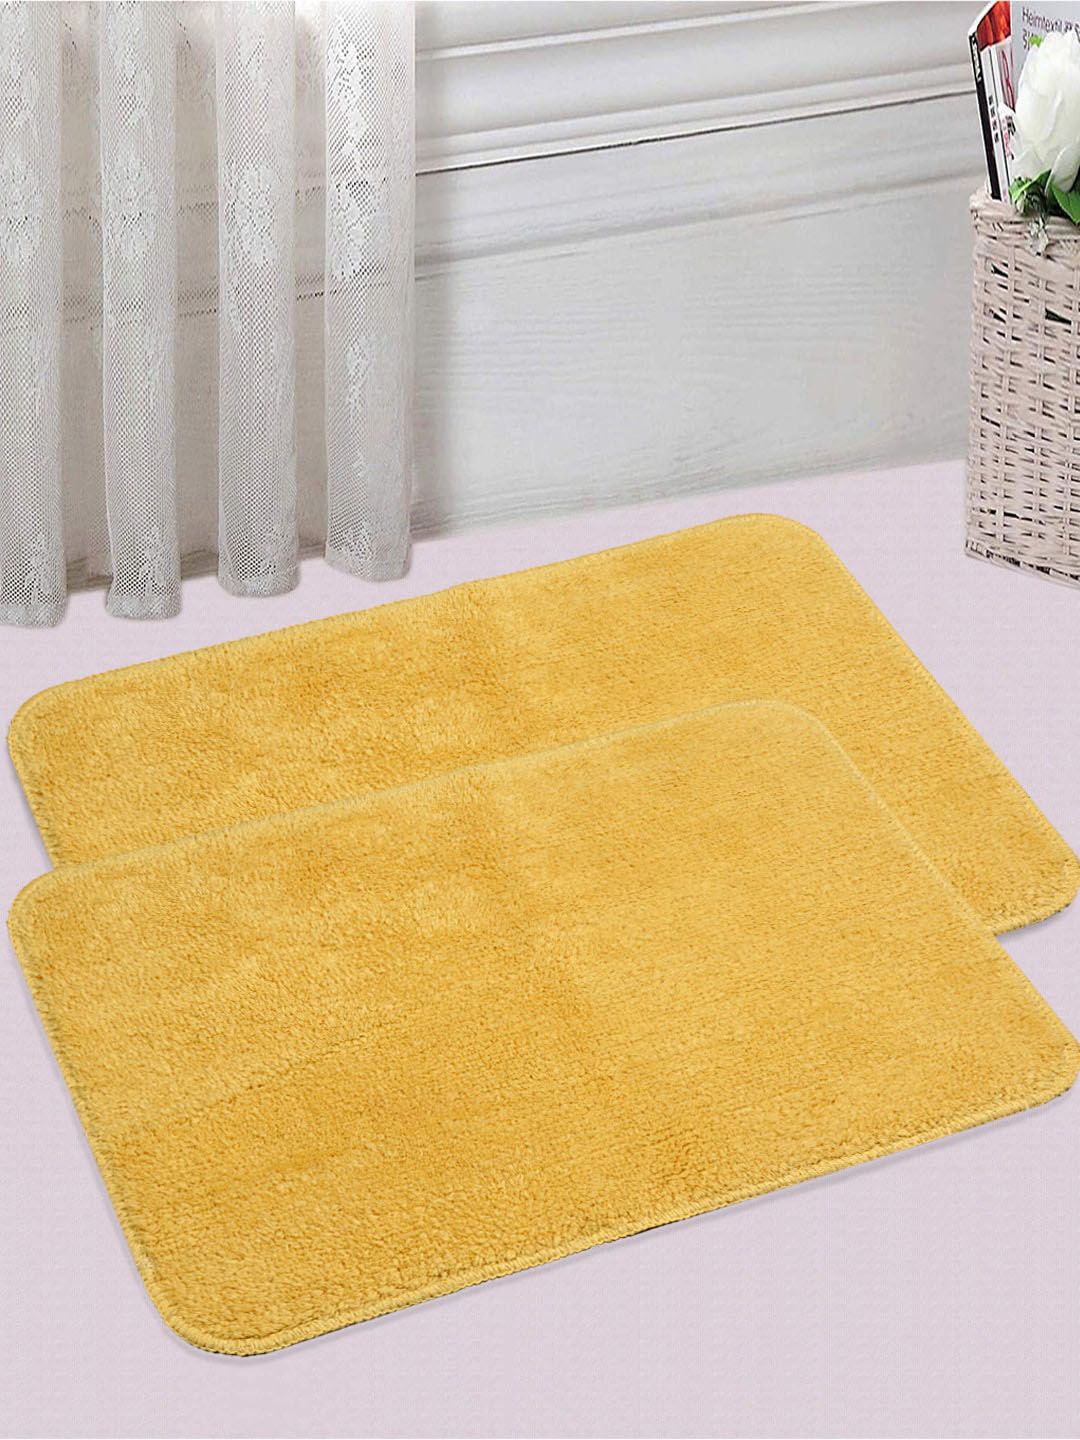 Saral Home Set of 2 Mustard Yellow 1200 GSM Solid Cotton Bath Rugs Price in India